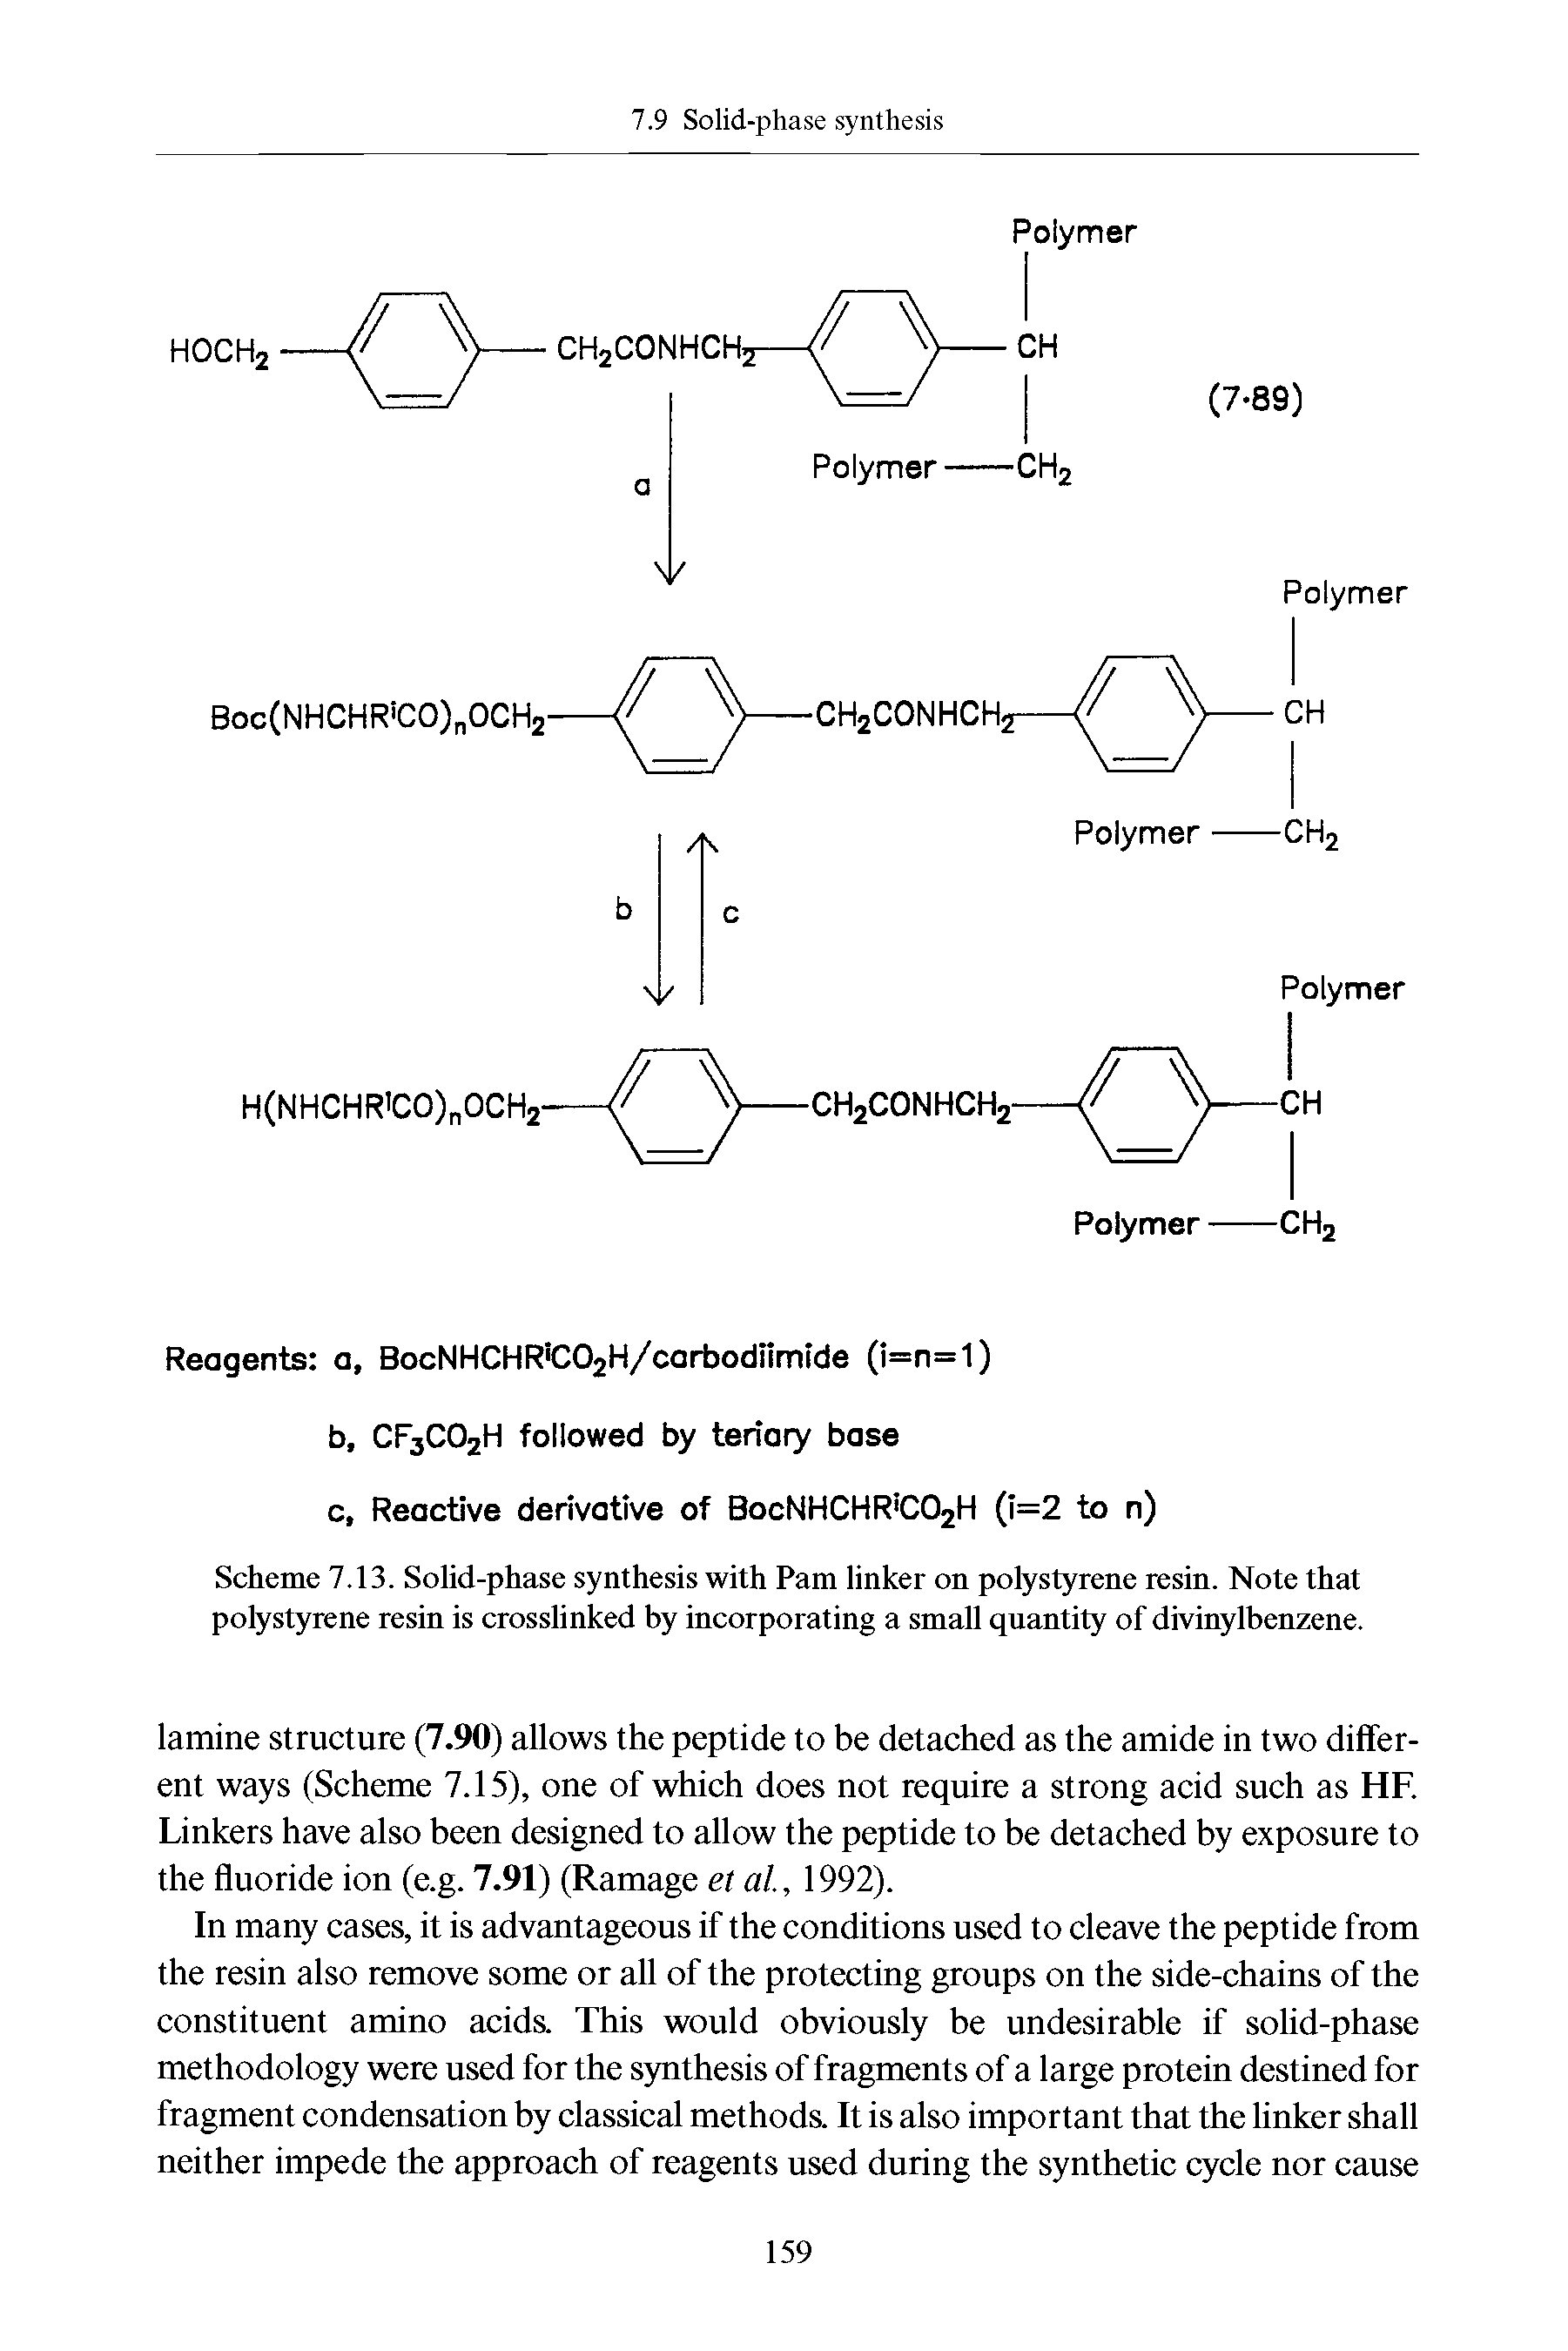 Scheme 7.13. Solid-phase synthesis with Pam linker on polystyrene resin. Note that polystyrene resin is crosslinked by incorporating a small quantity of divinylbenzene.